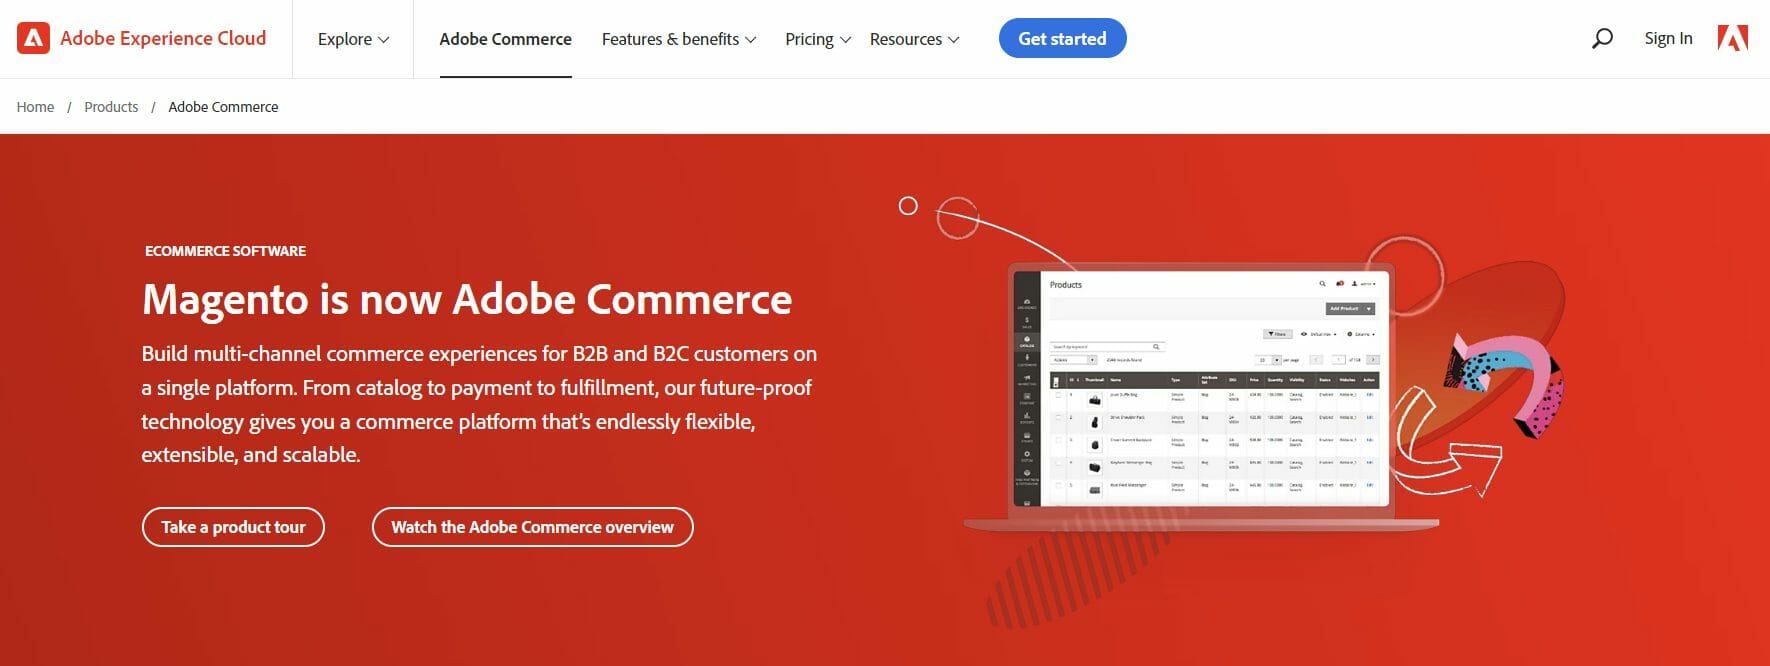 Adobe Commerce (powered by Magento)